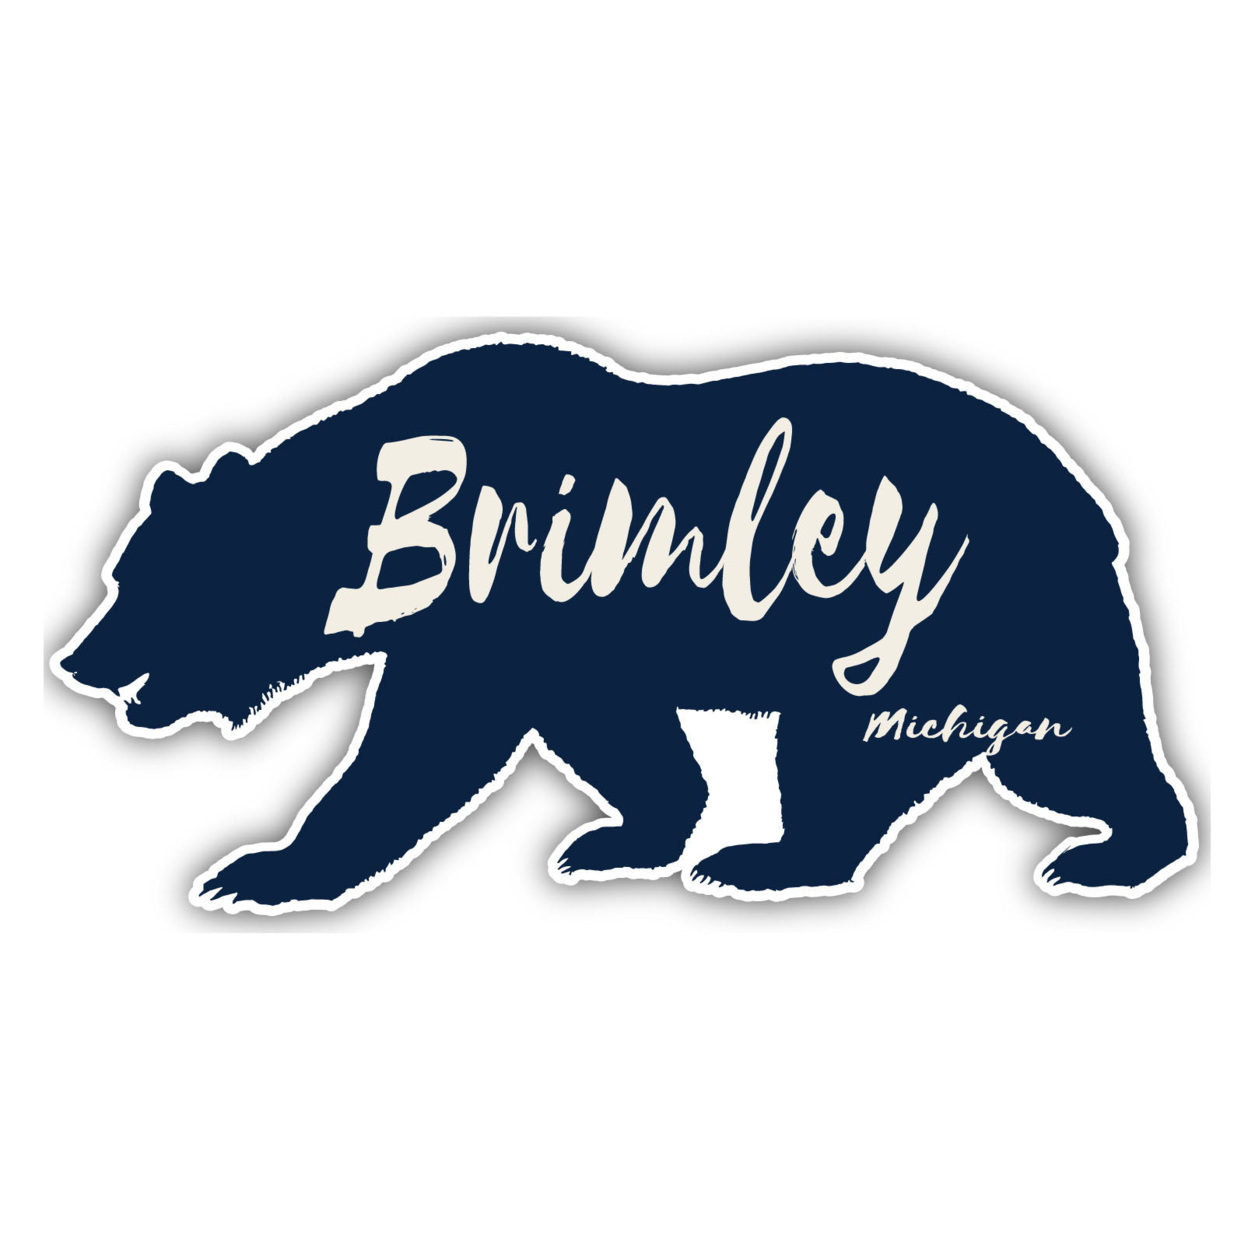 Brimley Michigan Souvenir Decorative Stickers (Choose Theme And Size) - 4-Pack, 6-Inch, Bear